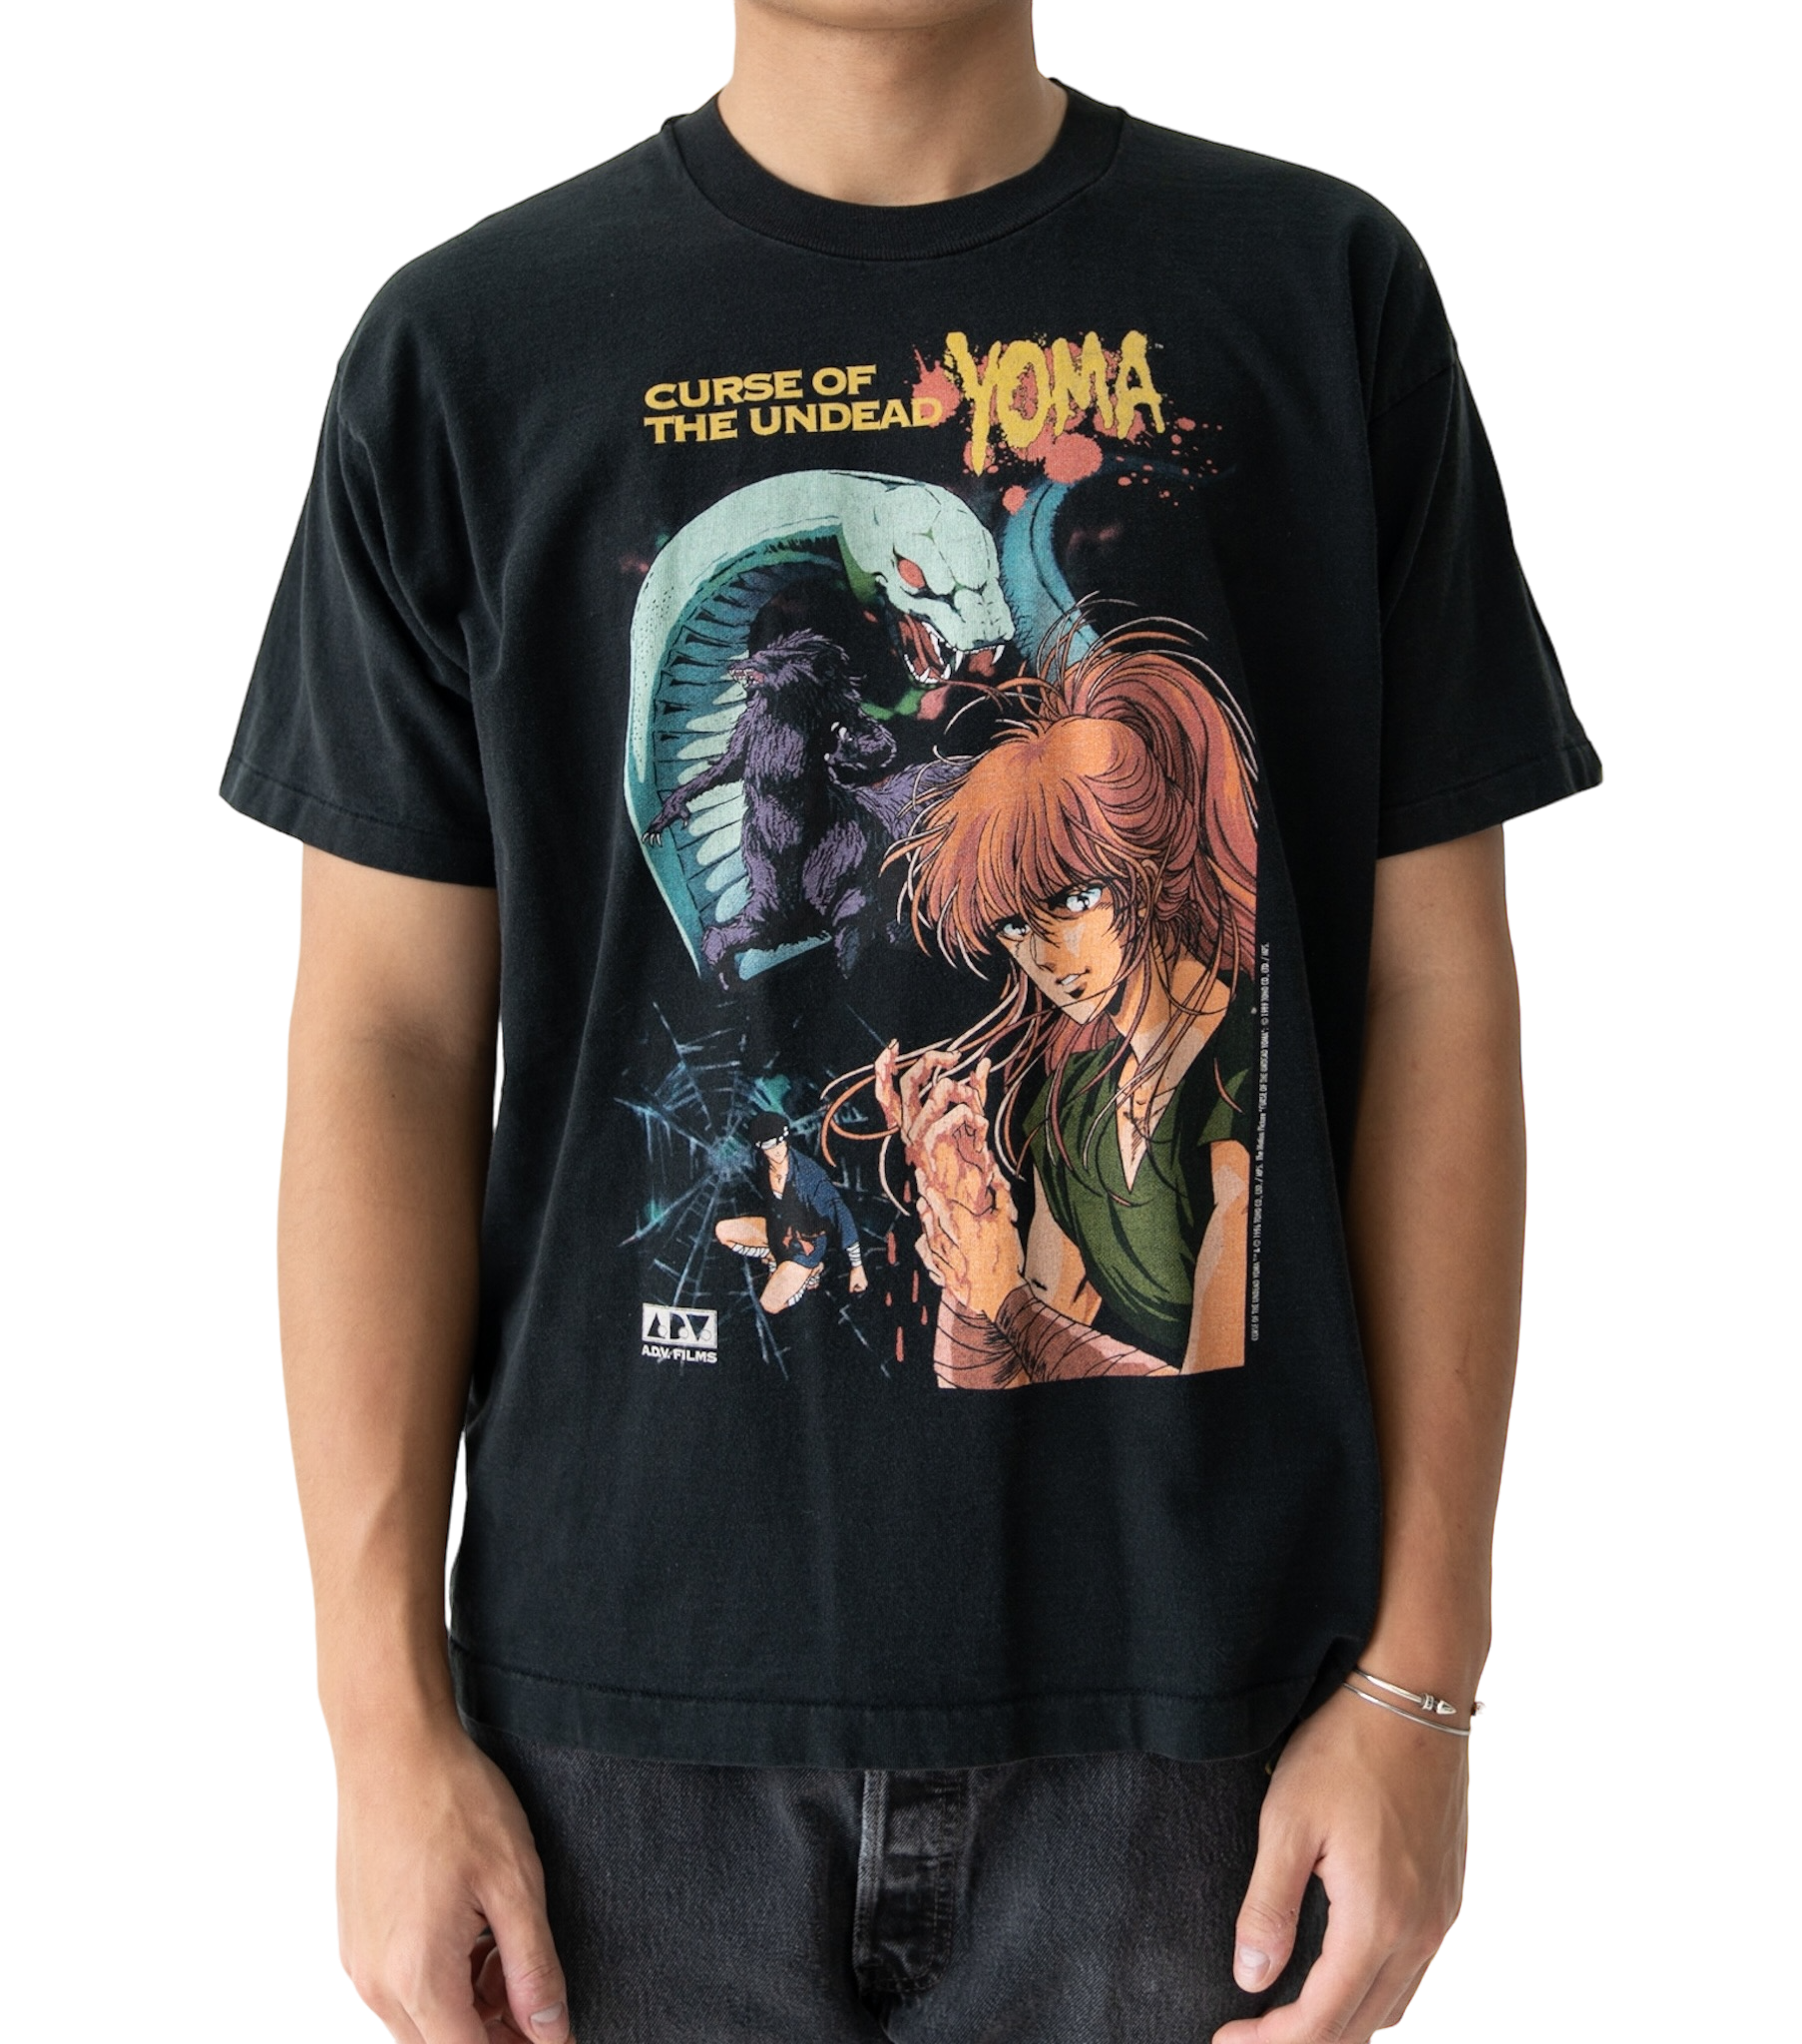 1996 YOMA CURSE OF THE UNDEAD TEE